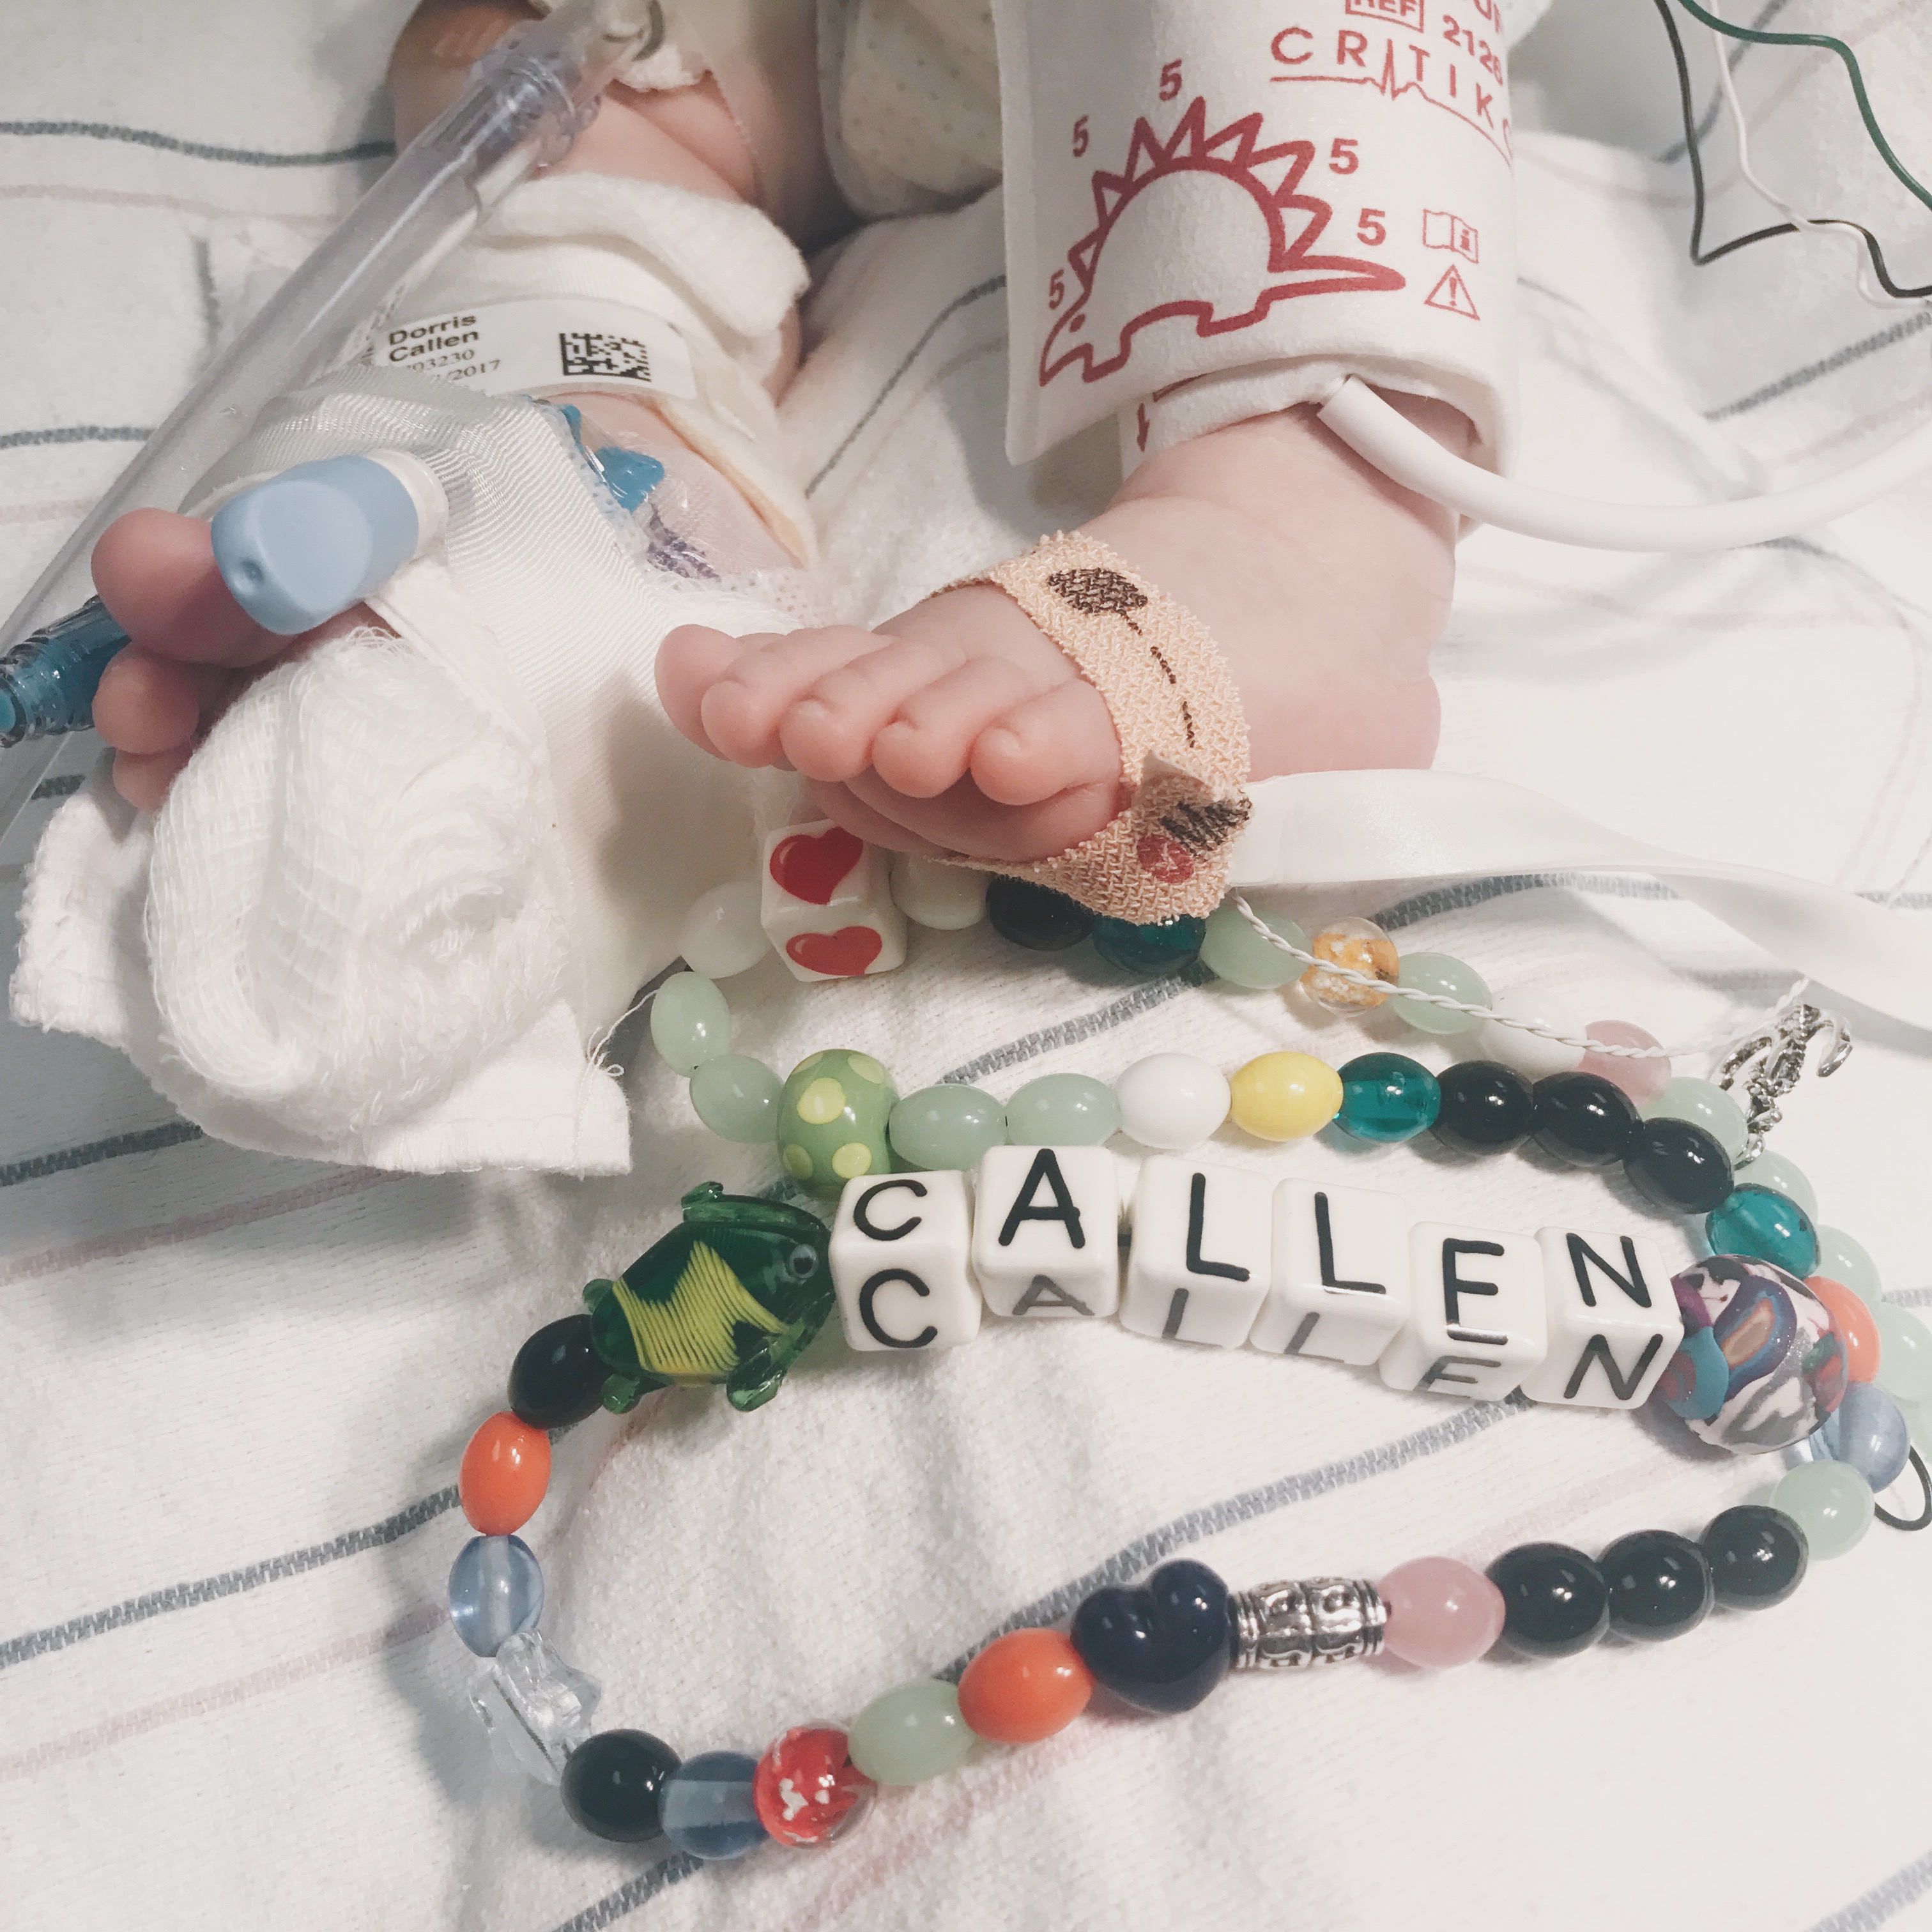 Callen's Journey Beads. Each bead represents a part of his story.